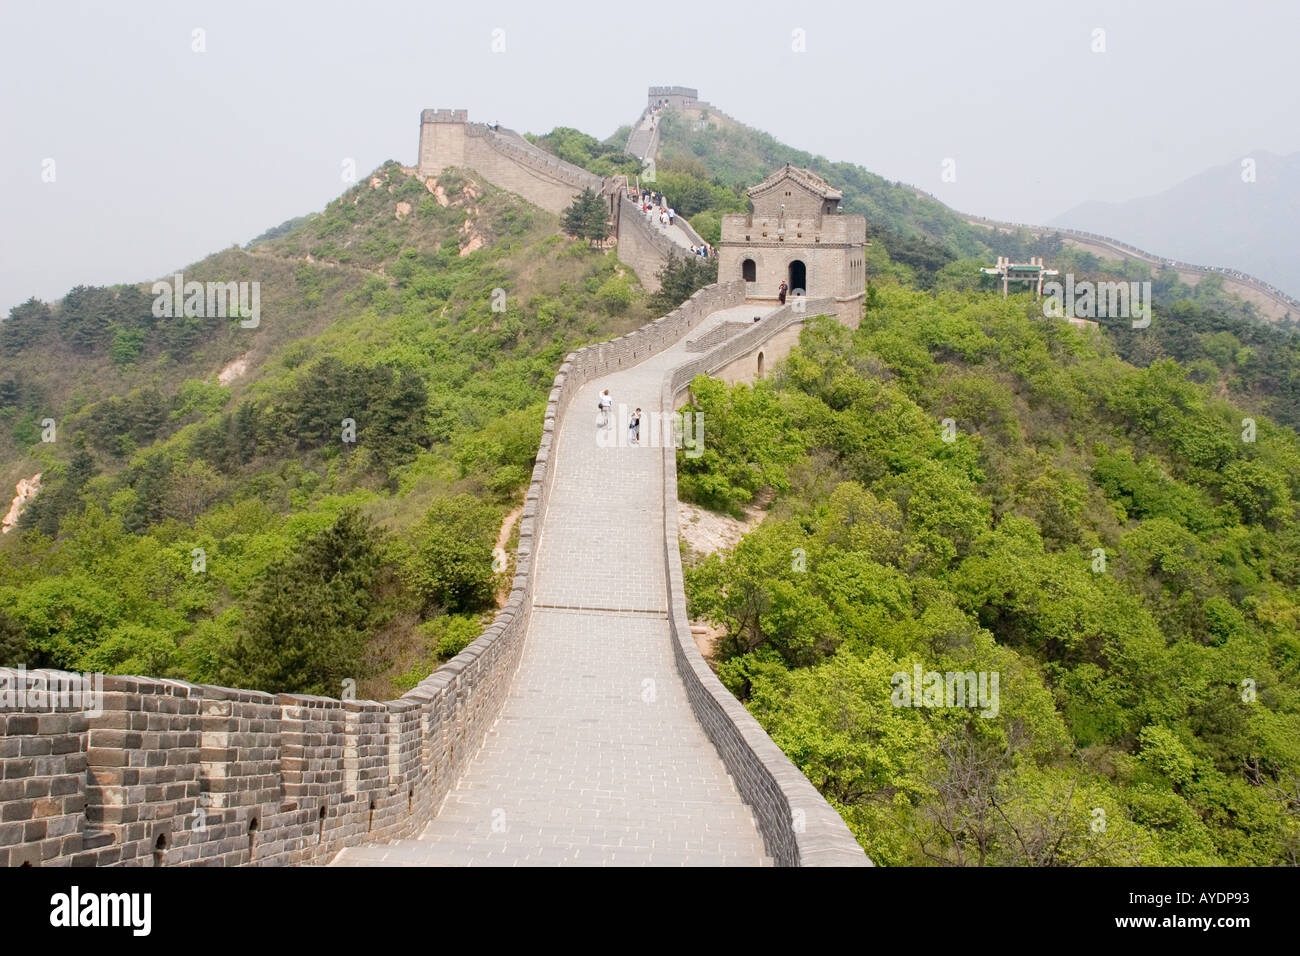 Chinese Man Climbs Up Steep Steps At The Great Wall Of China Stock Photo -  Download Image Now - iStock